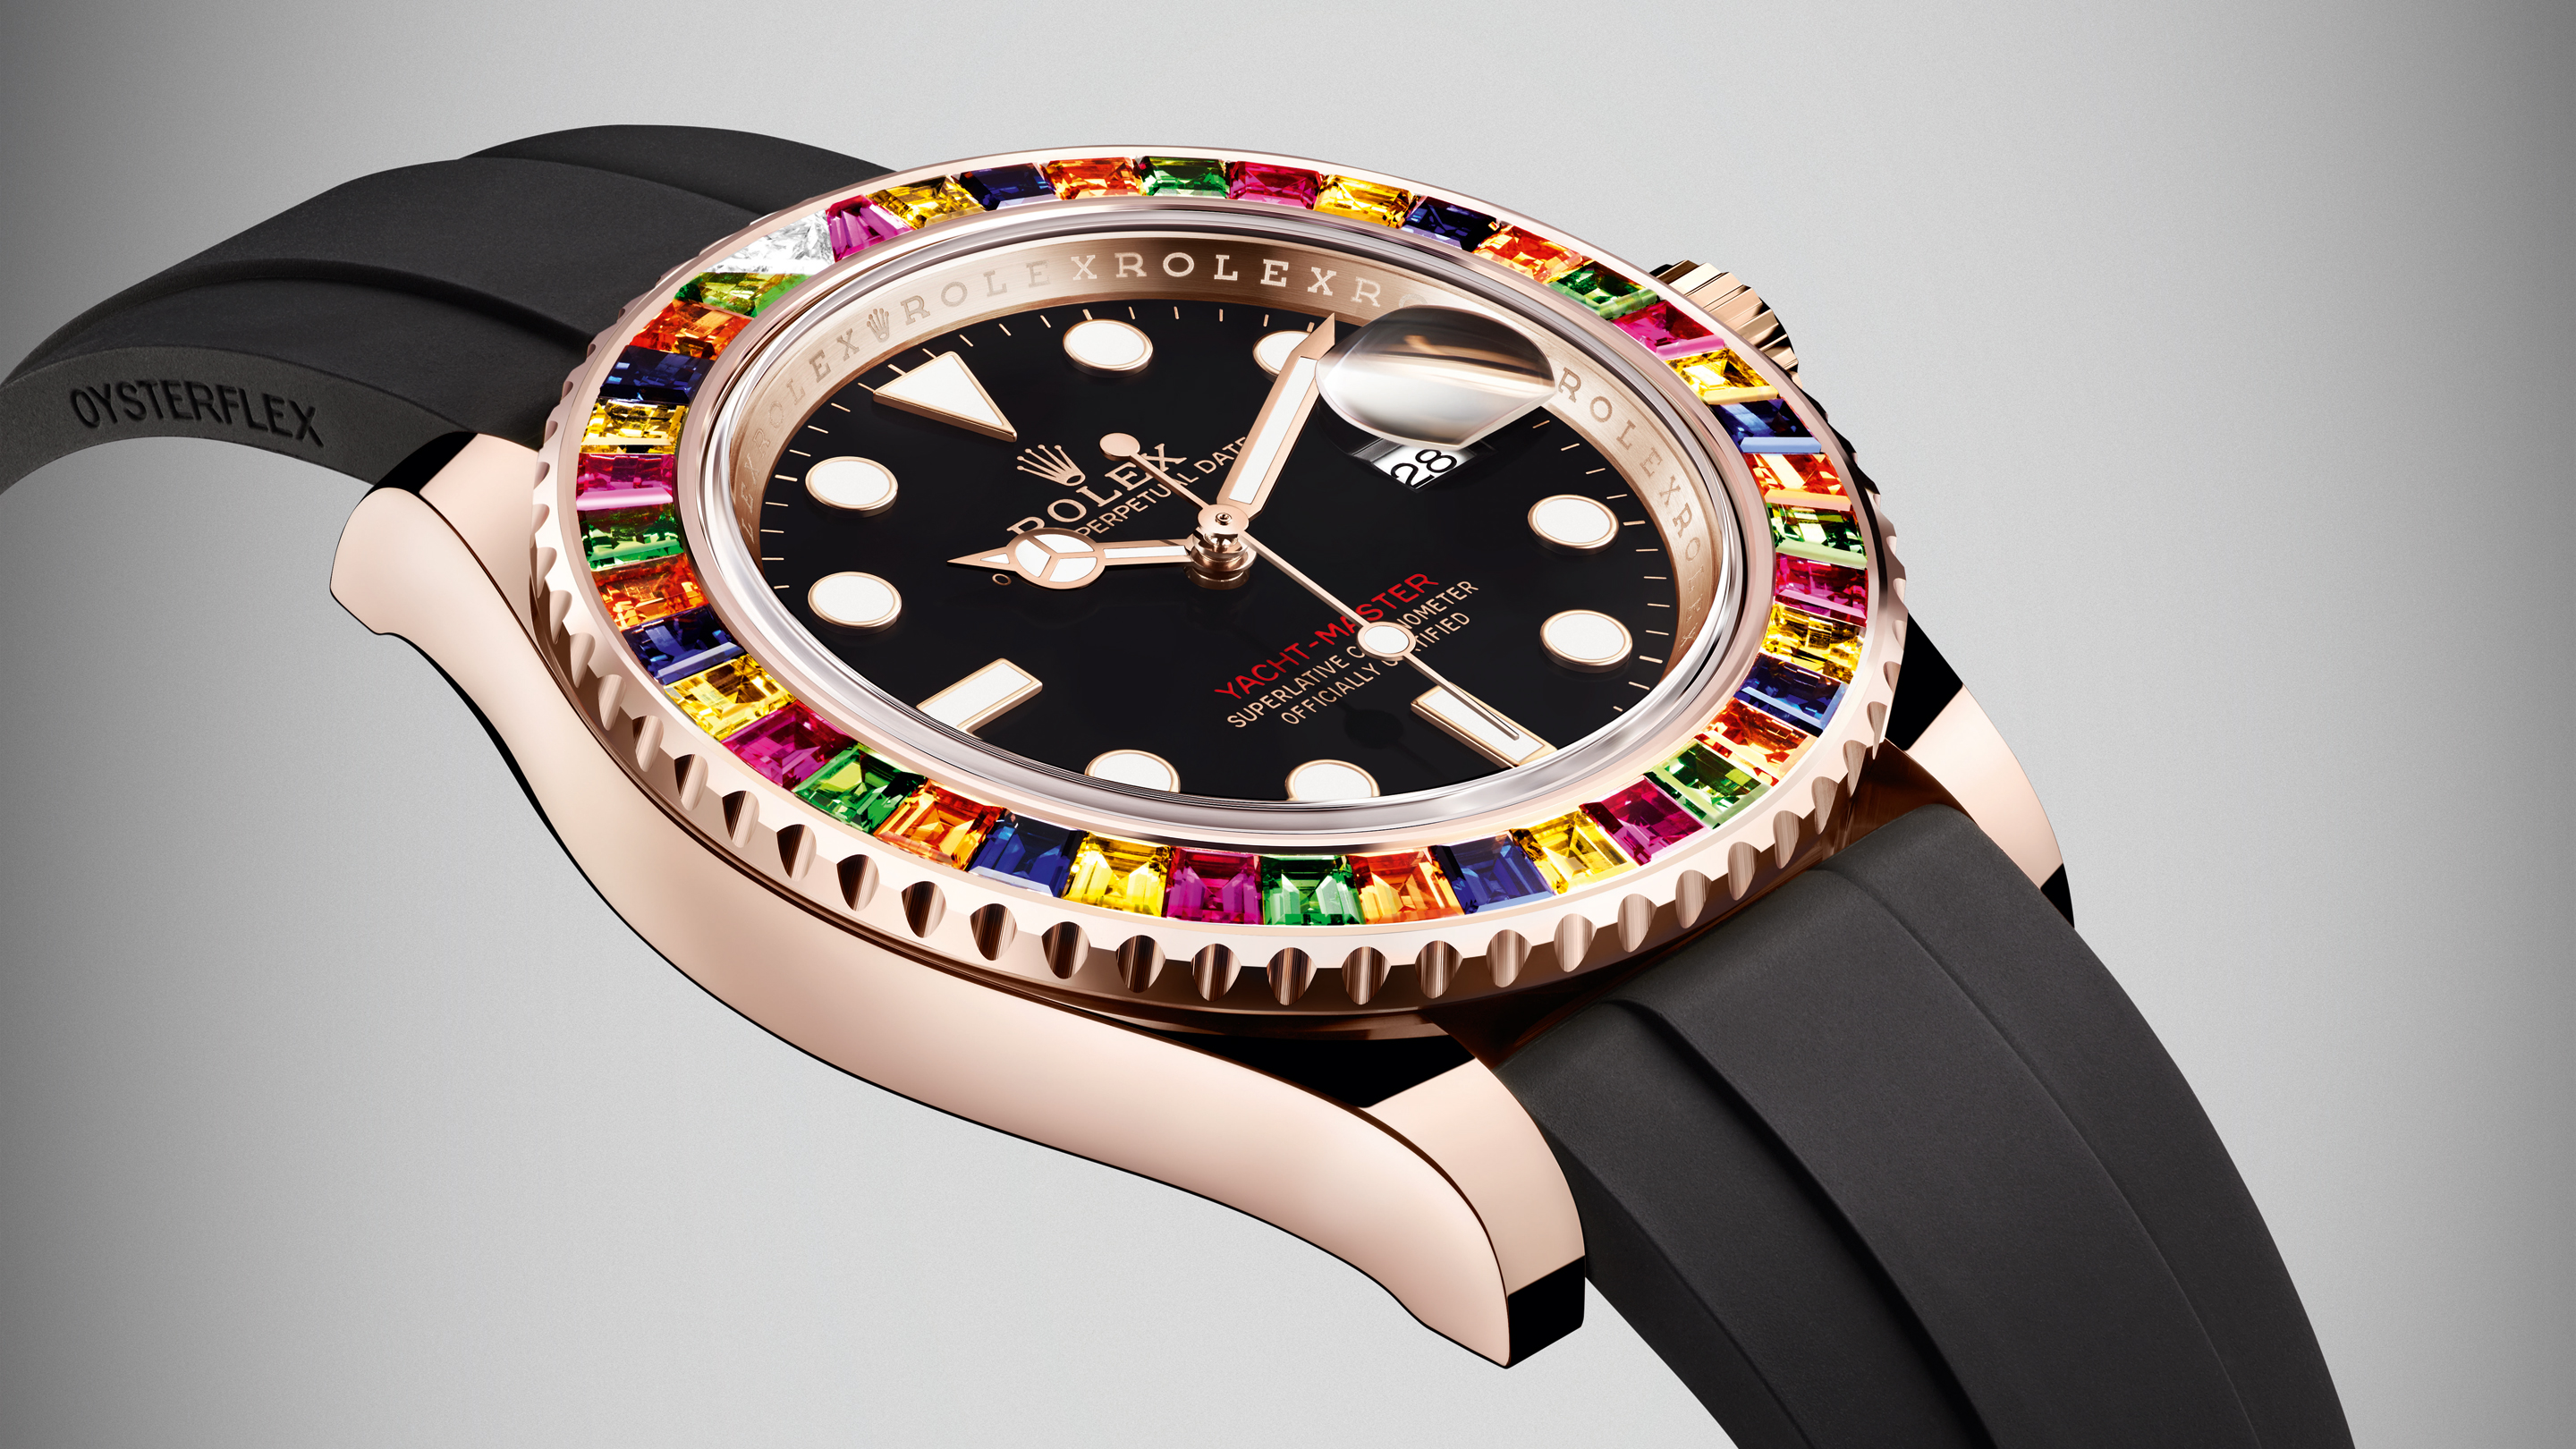 Introducing: The Rolex Yacht-Master 40 